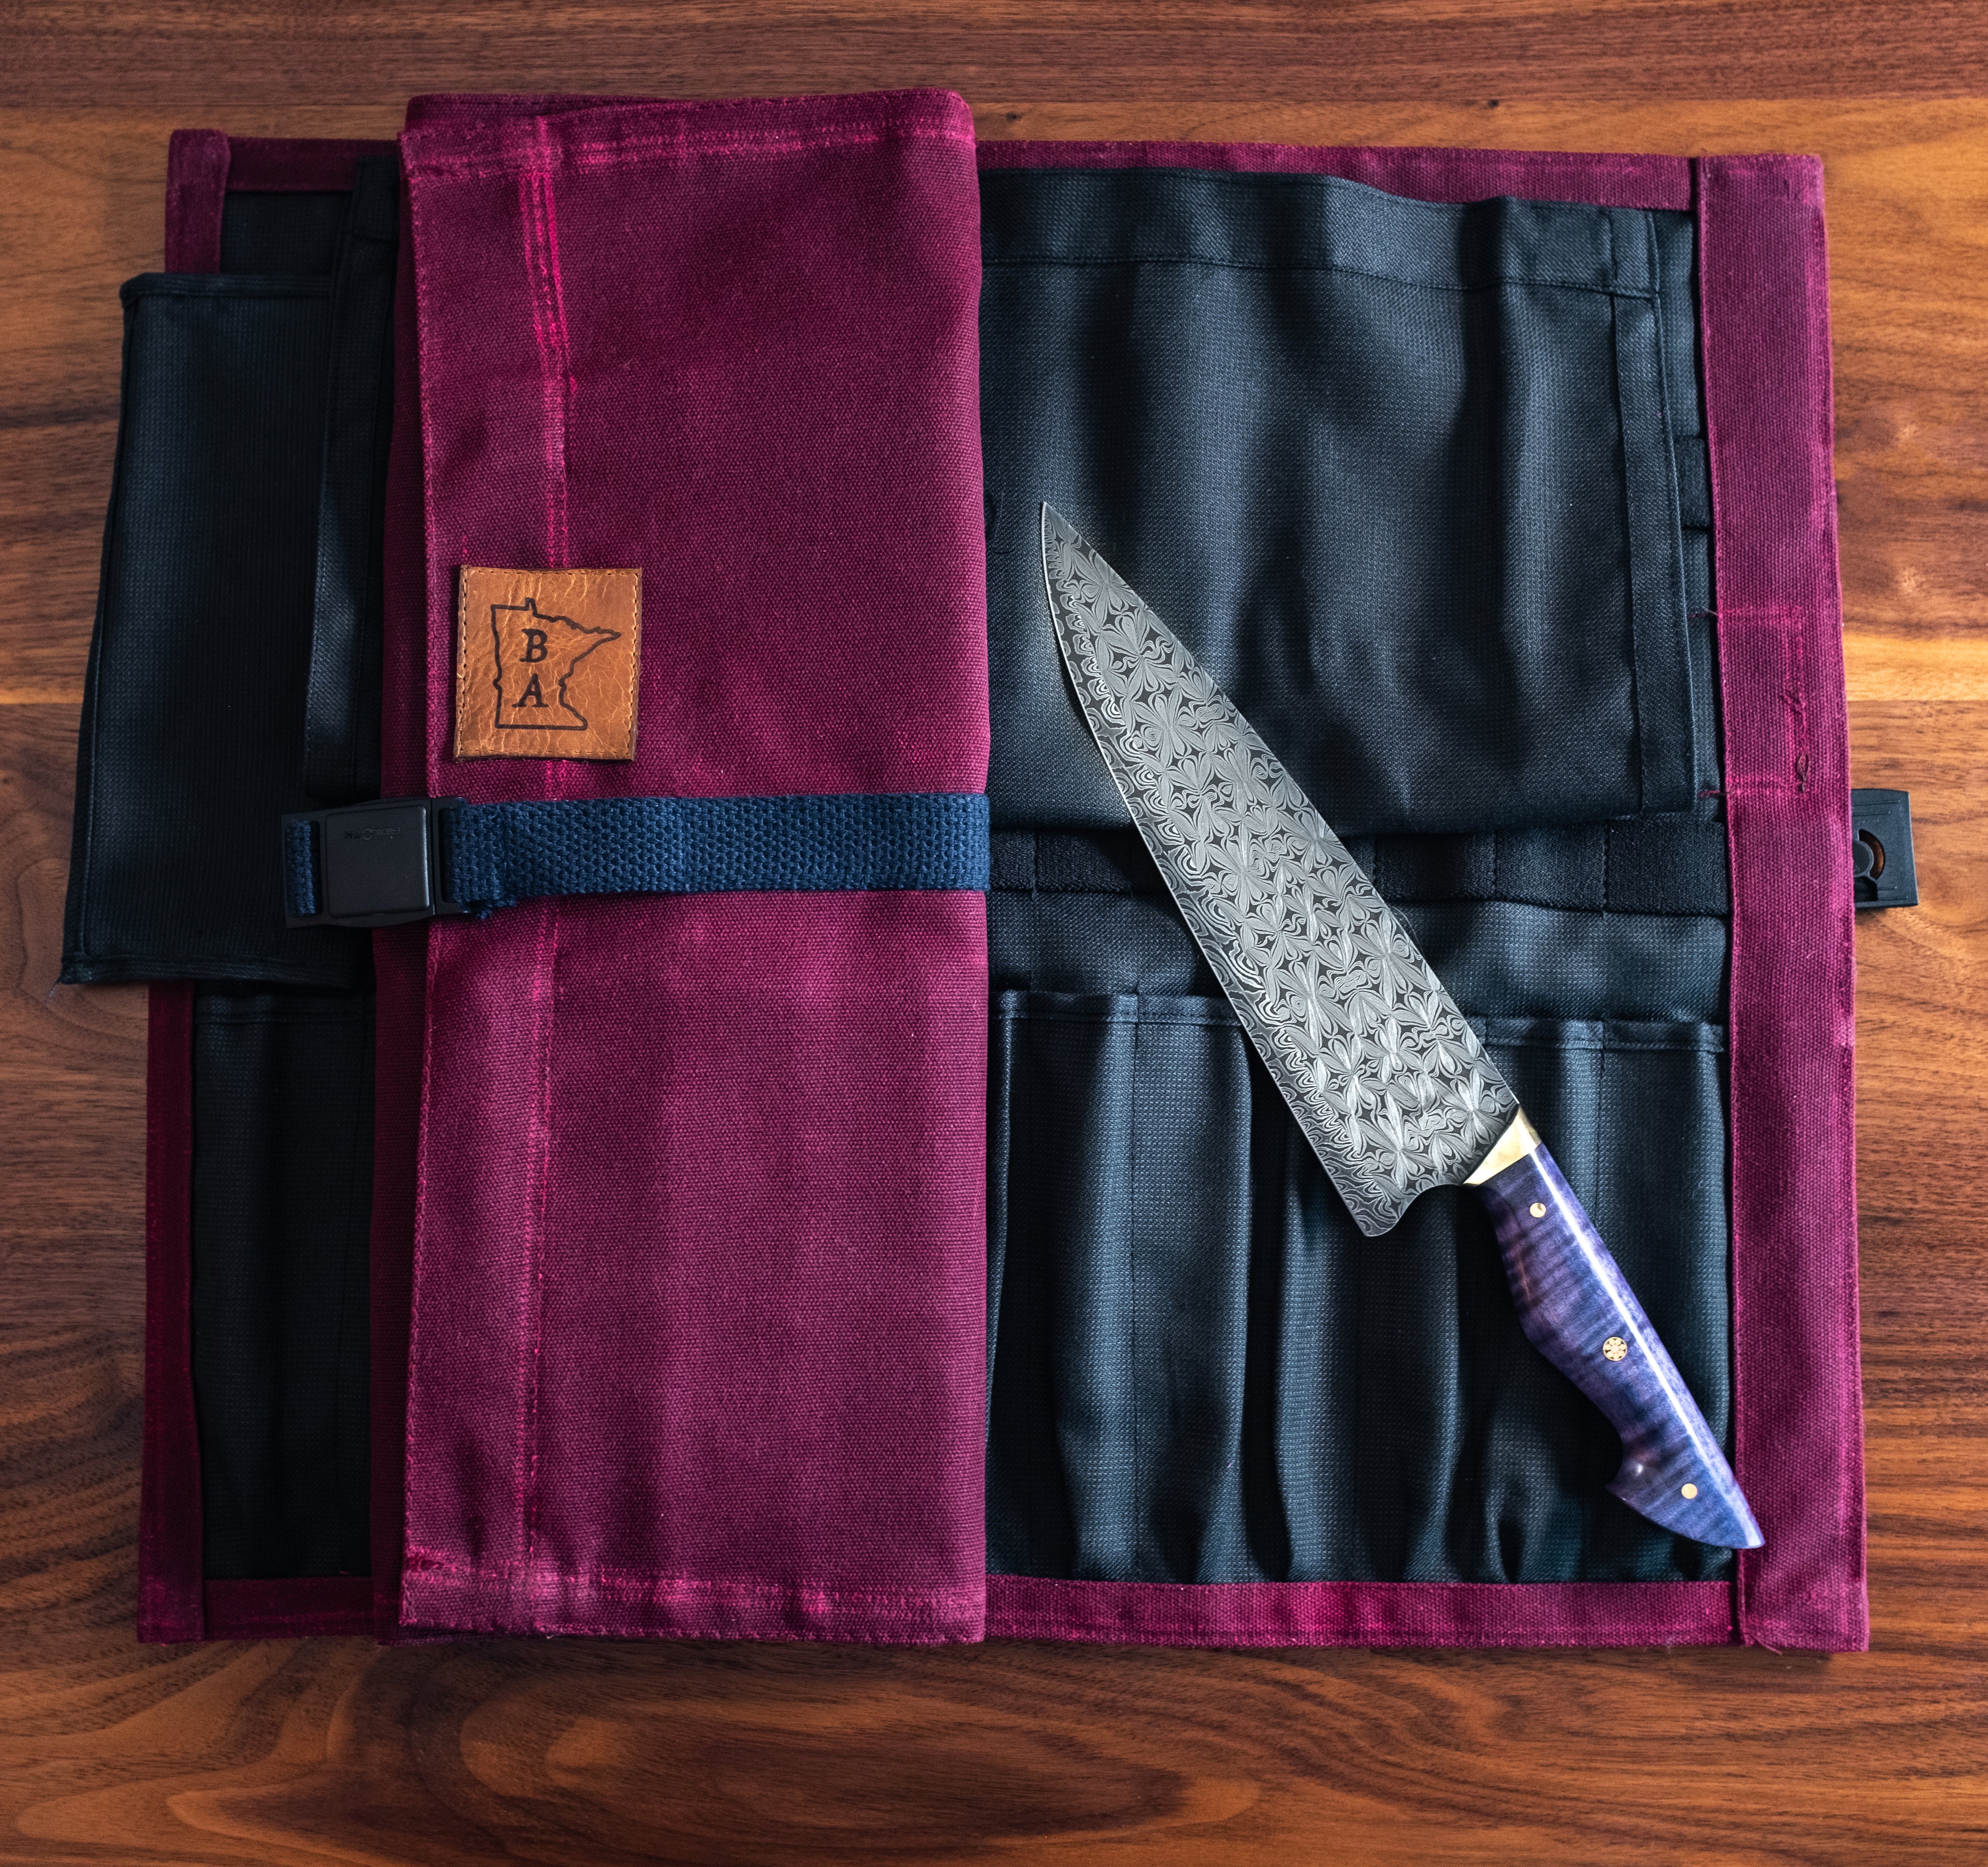 Burgundy Side Hustle knife roll unfolded showing the kevlar interior. Another burgundy Side Hustle knife roll sitting on top alongside a knife. Produced in Minnesota by Craftmade Aprons.